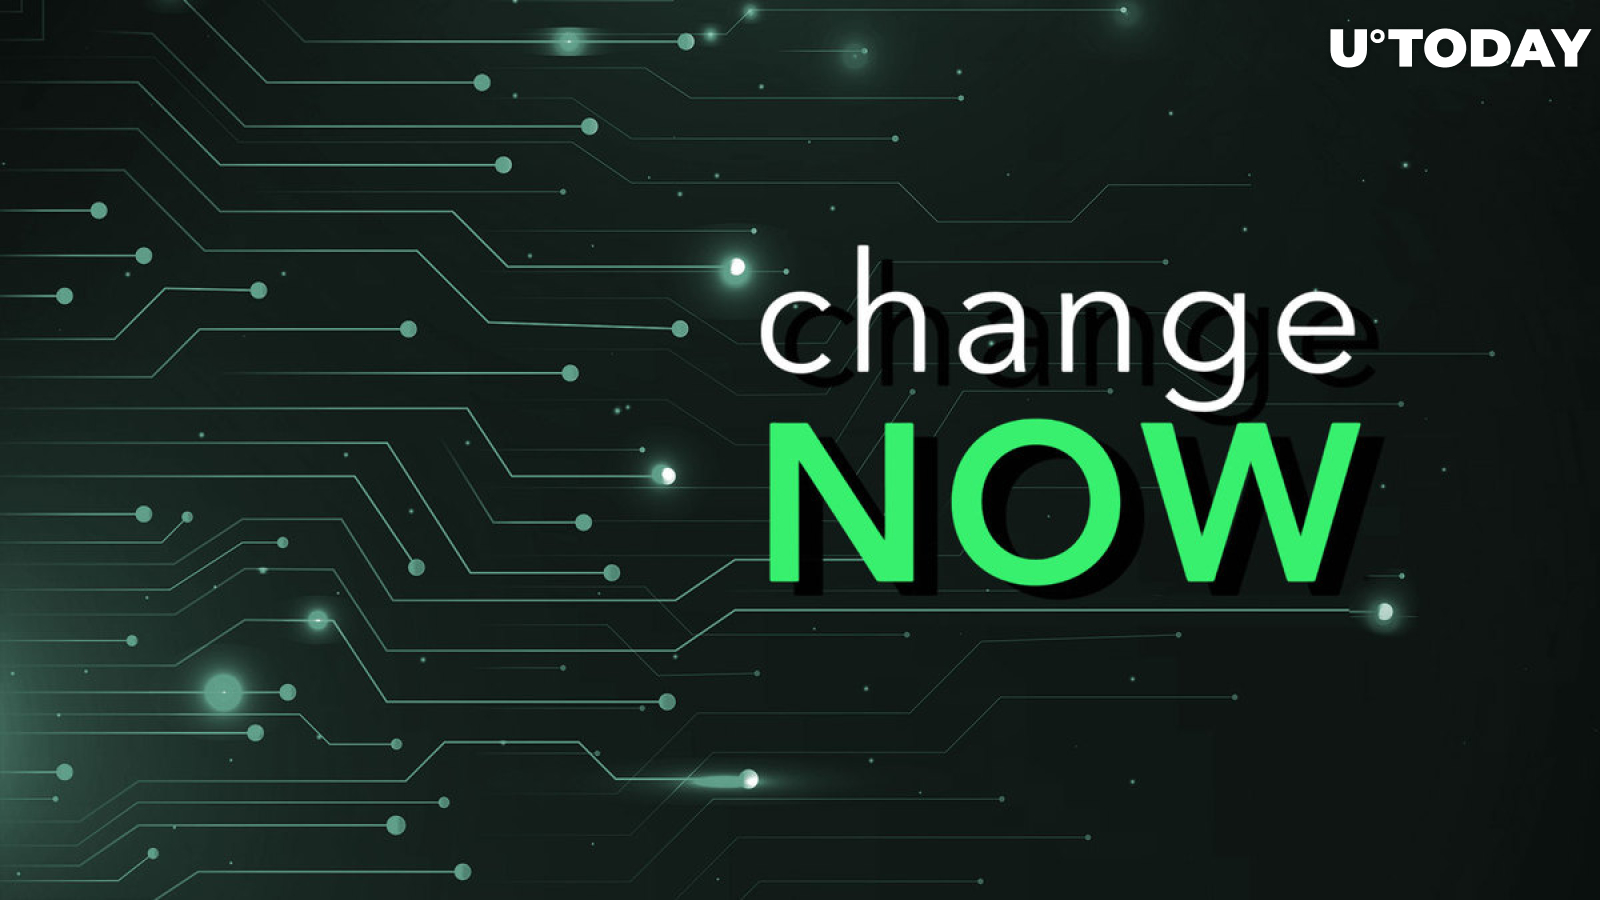 ChangeNOW Crypto Exchange Targets Hong Kong SFC License Following Major CEXes